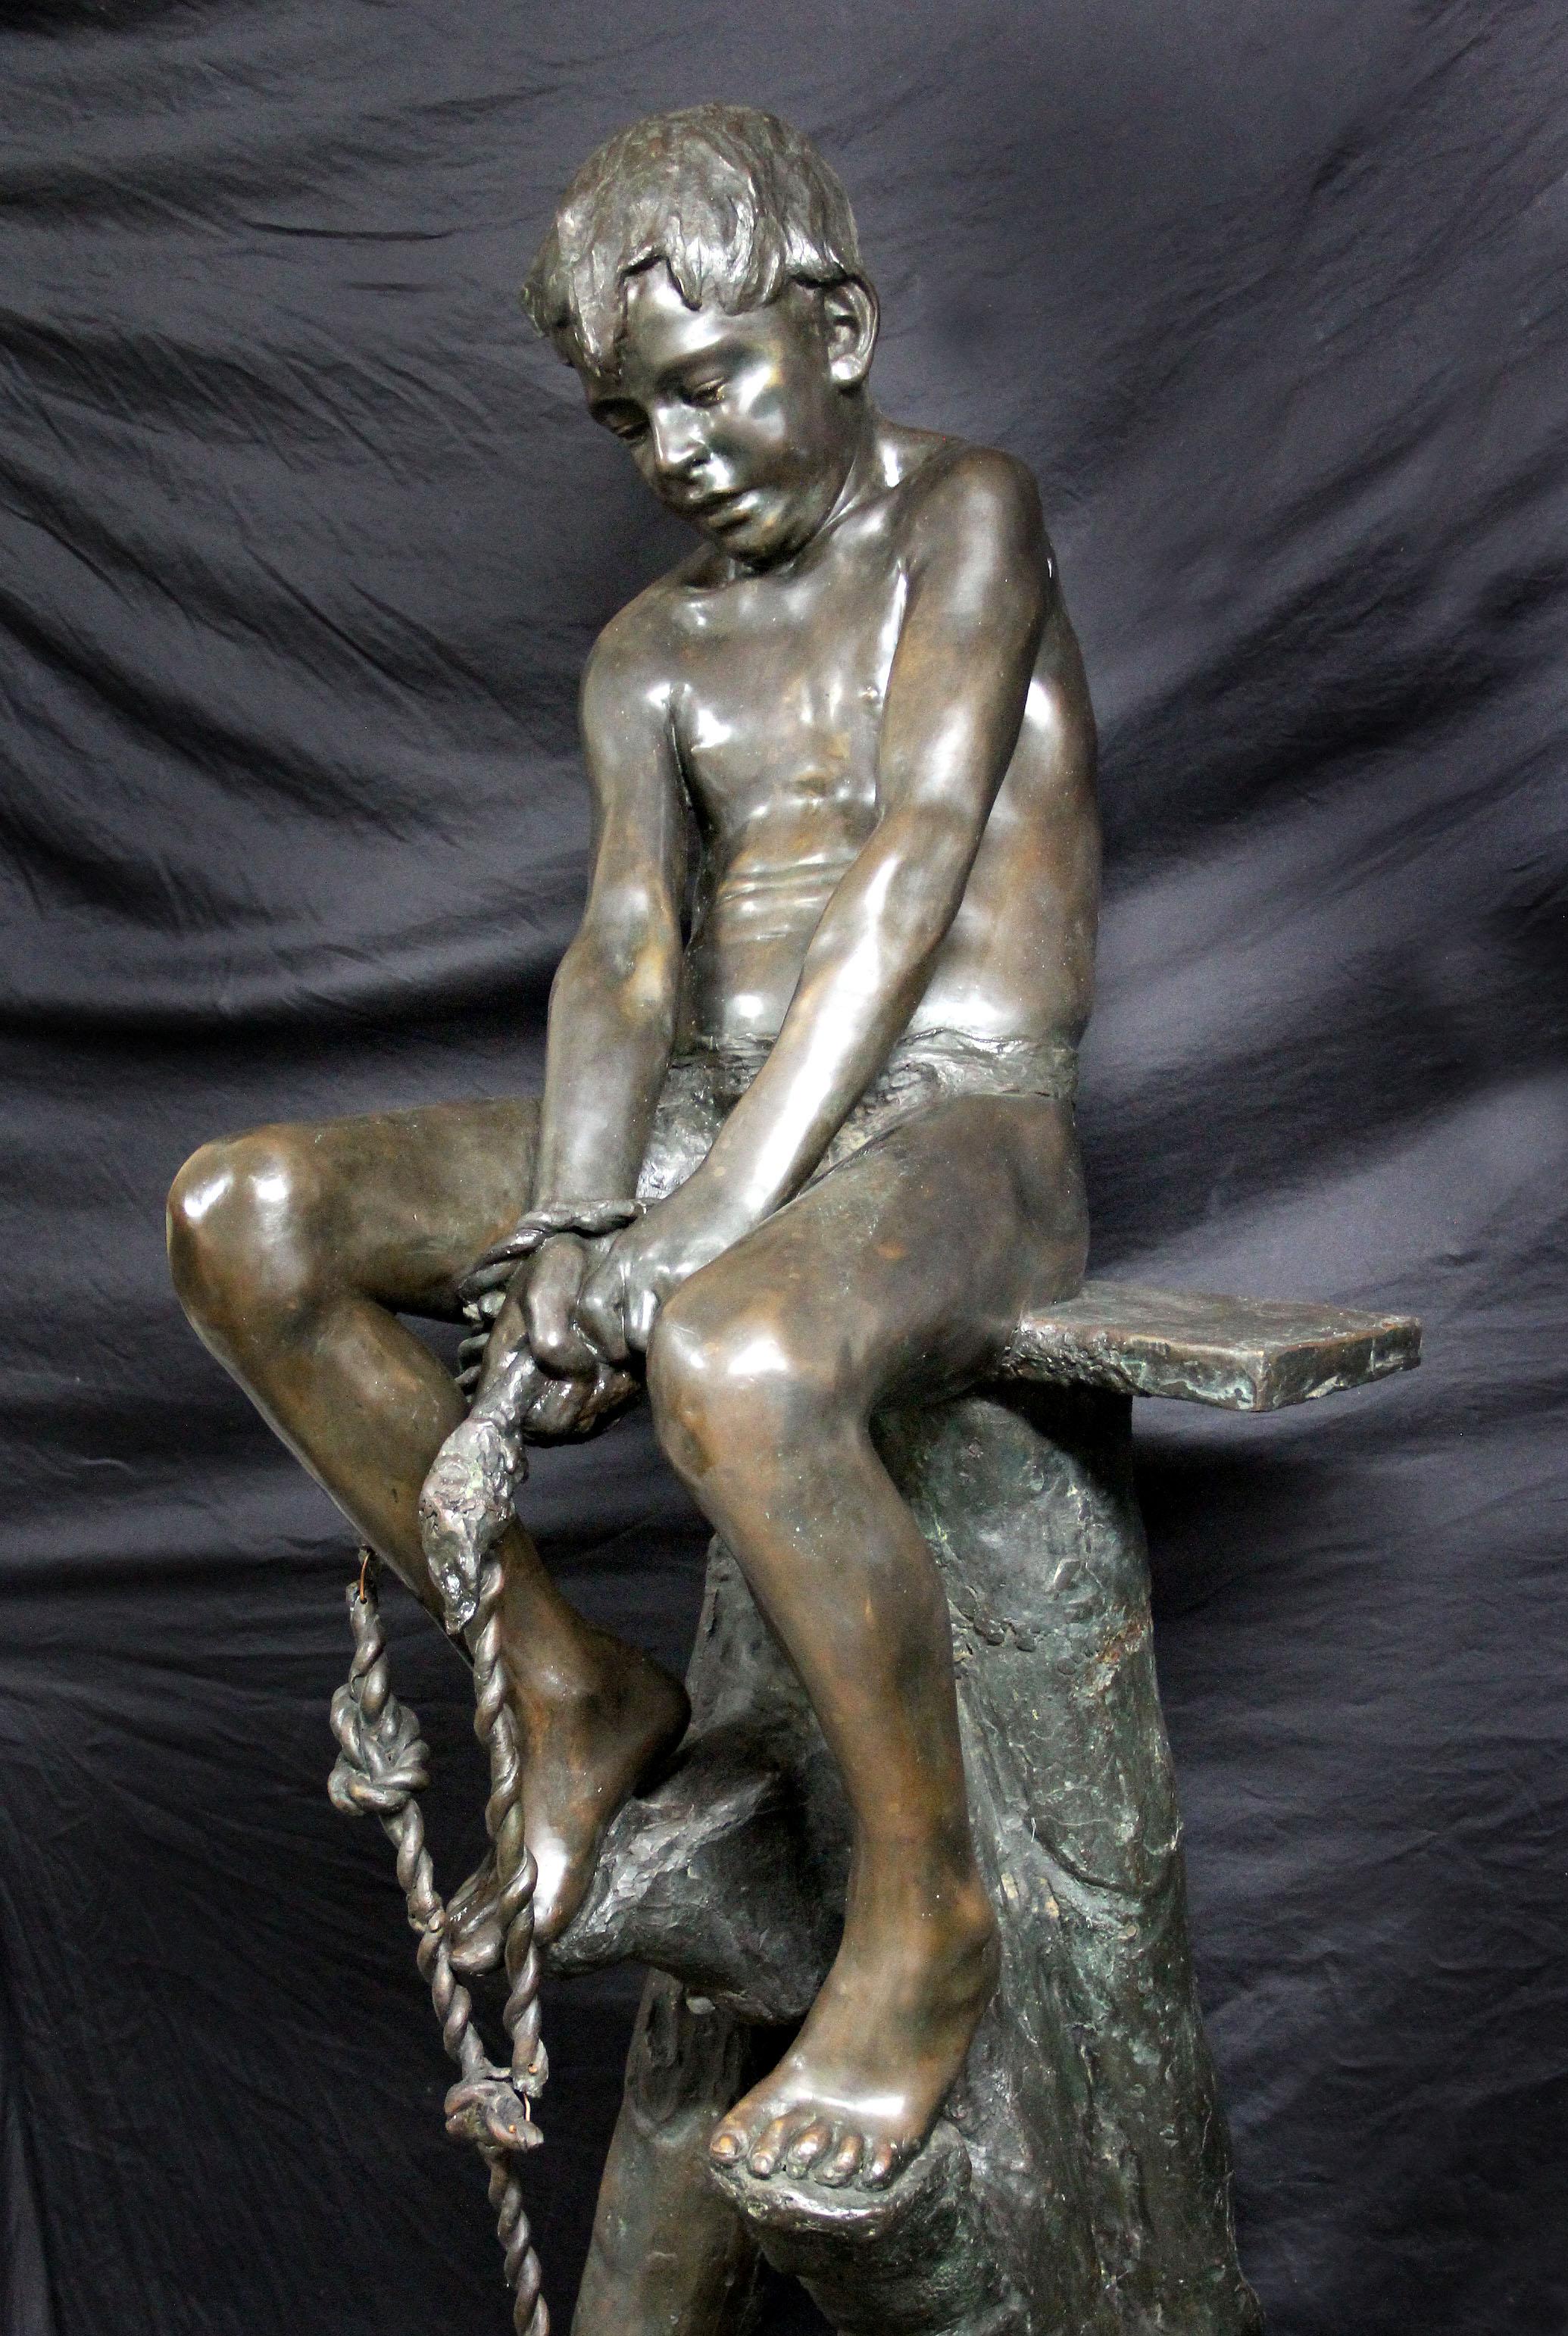 An exceptional early 20th century life size Italian bronze sculpture of a child fisher by Raffaele Marino
Item # 2628

Raffaele Marino

This is a very similar model that is in Largo Barbaja, Mergellina, Naples. Entitled “La Fontana del